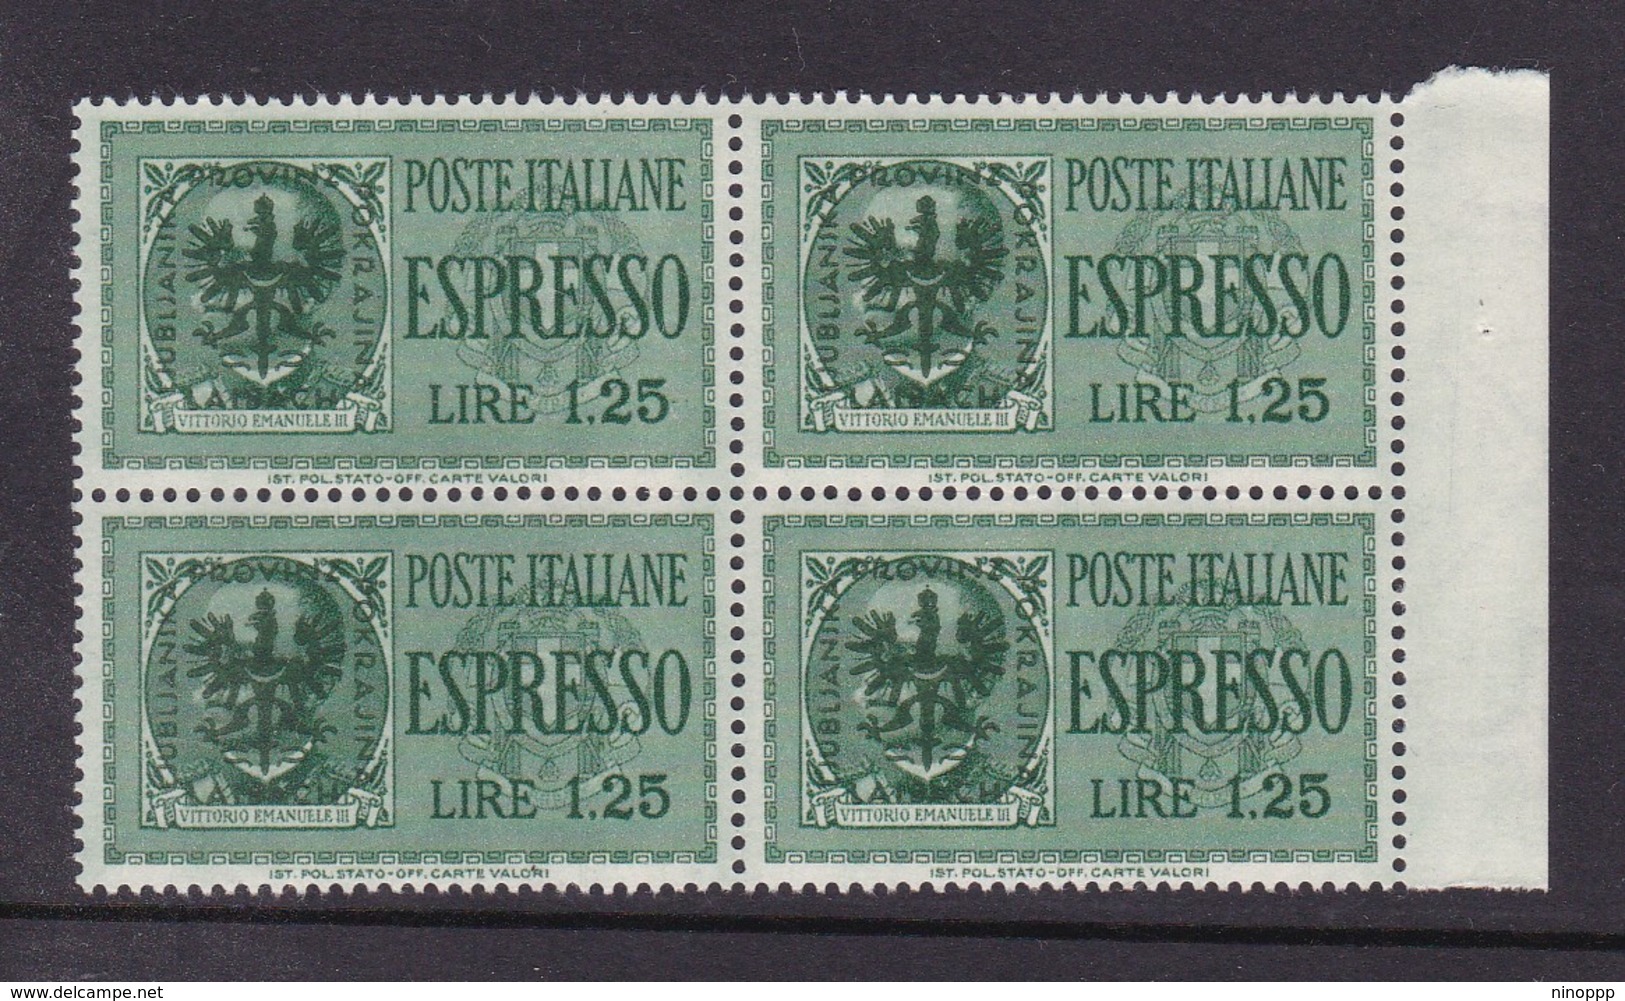 Italy-WWII Occupation-german Occupation Of Lubiana NE1 1944 Special Delivery , Block 4 Mint Never Hinged - Deutsche Bes.: Lubiana